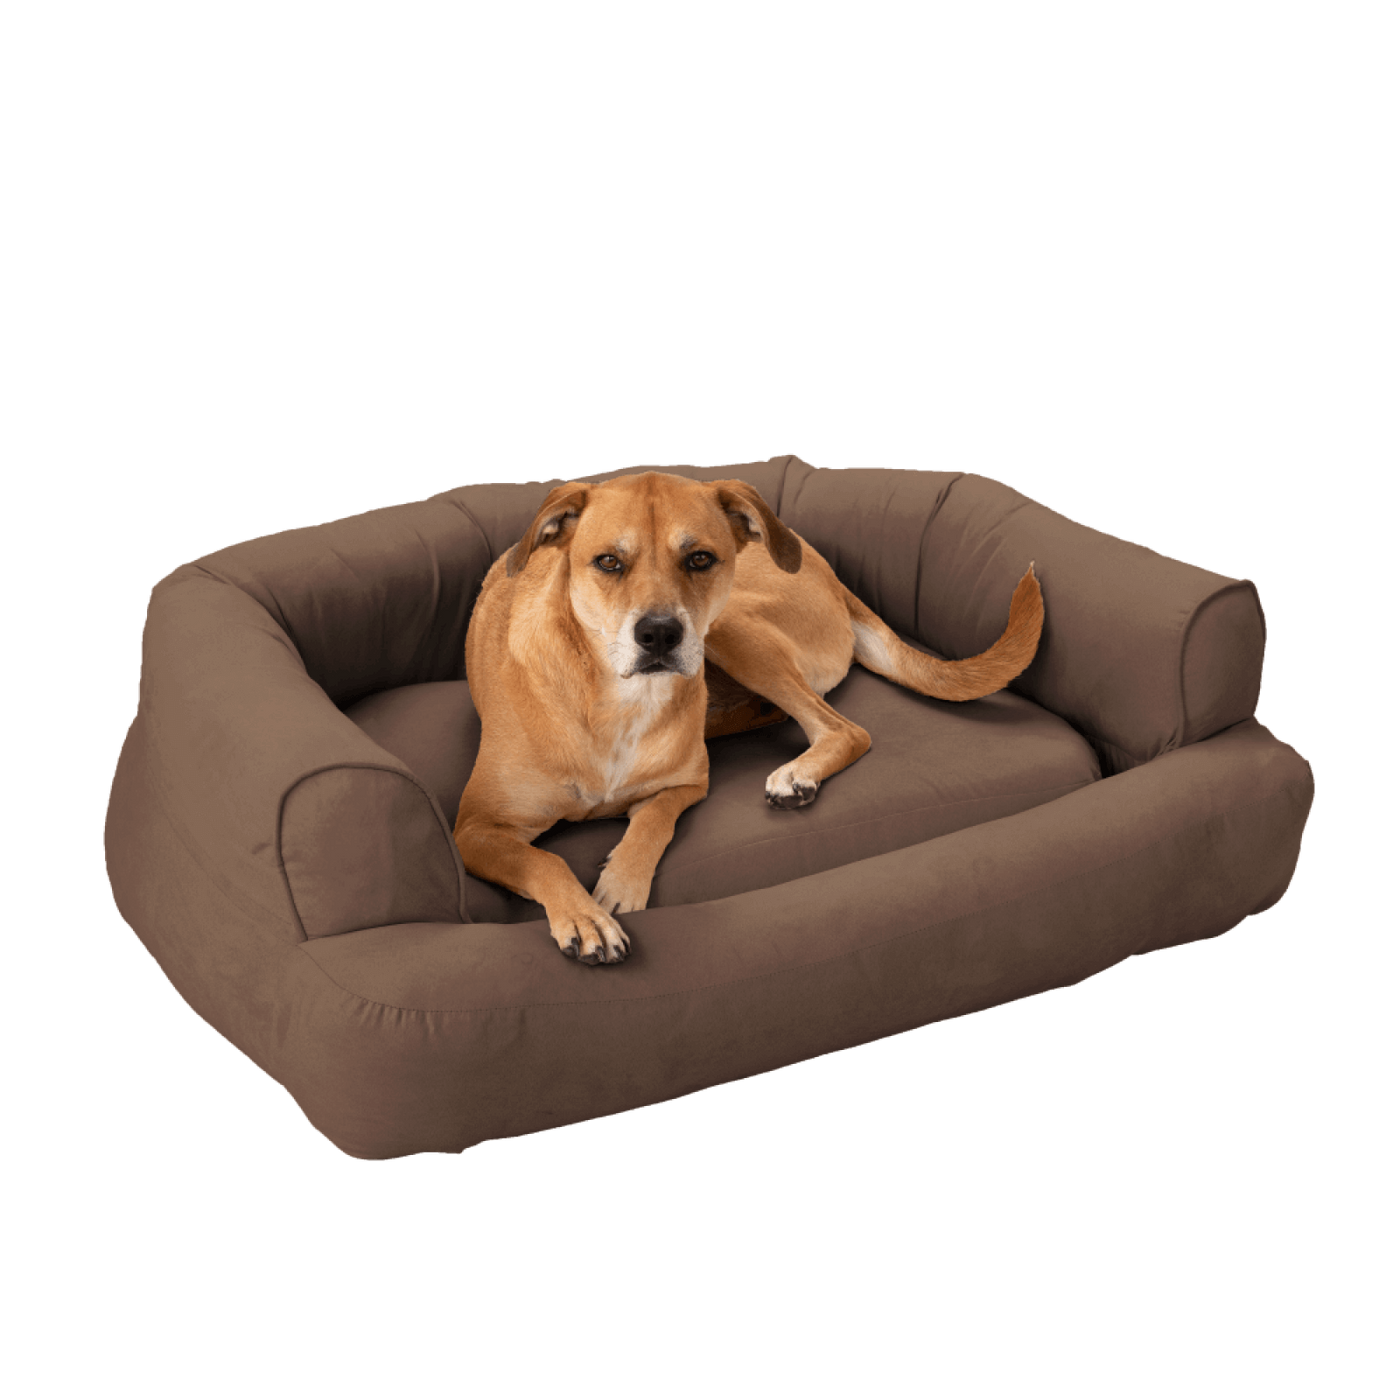 Snoozer Pet Products - Orthopedisch Hondenbed met Memory Foam - Anthracite